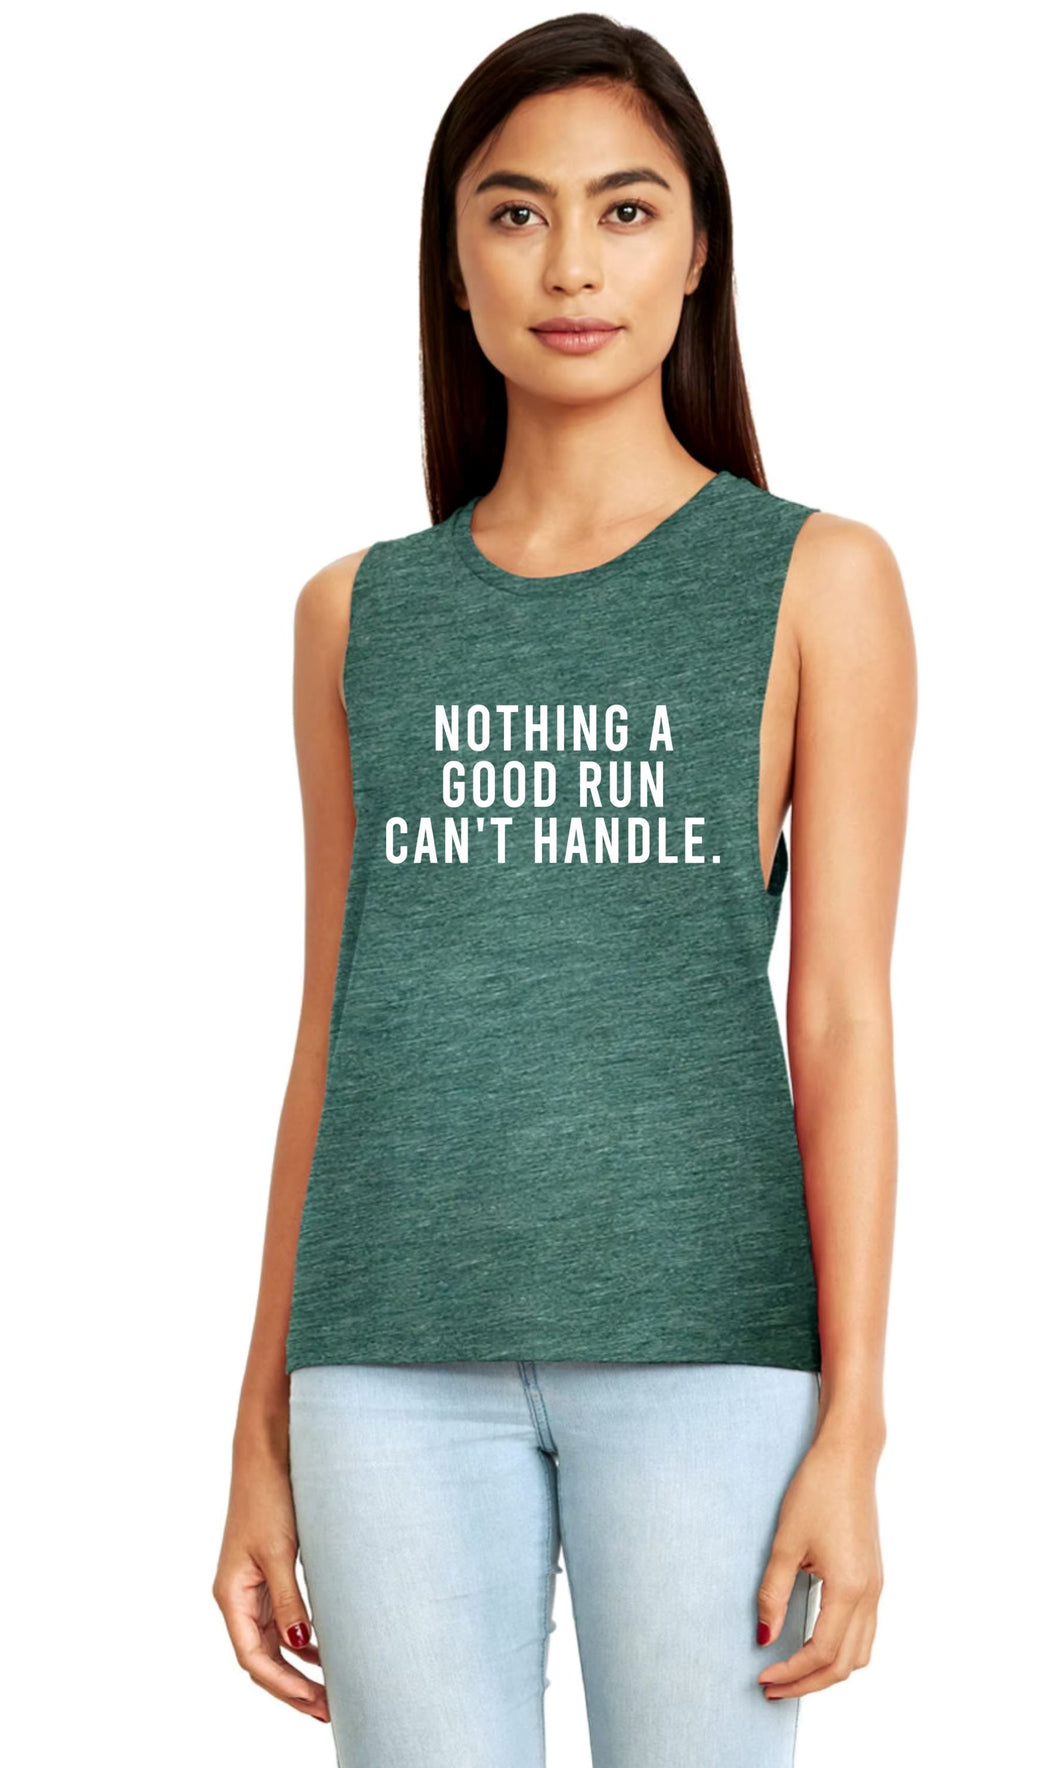 Nothing A Good Run Can't Handle Muscle Tank - Gym Babe Apparel